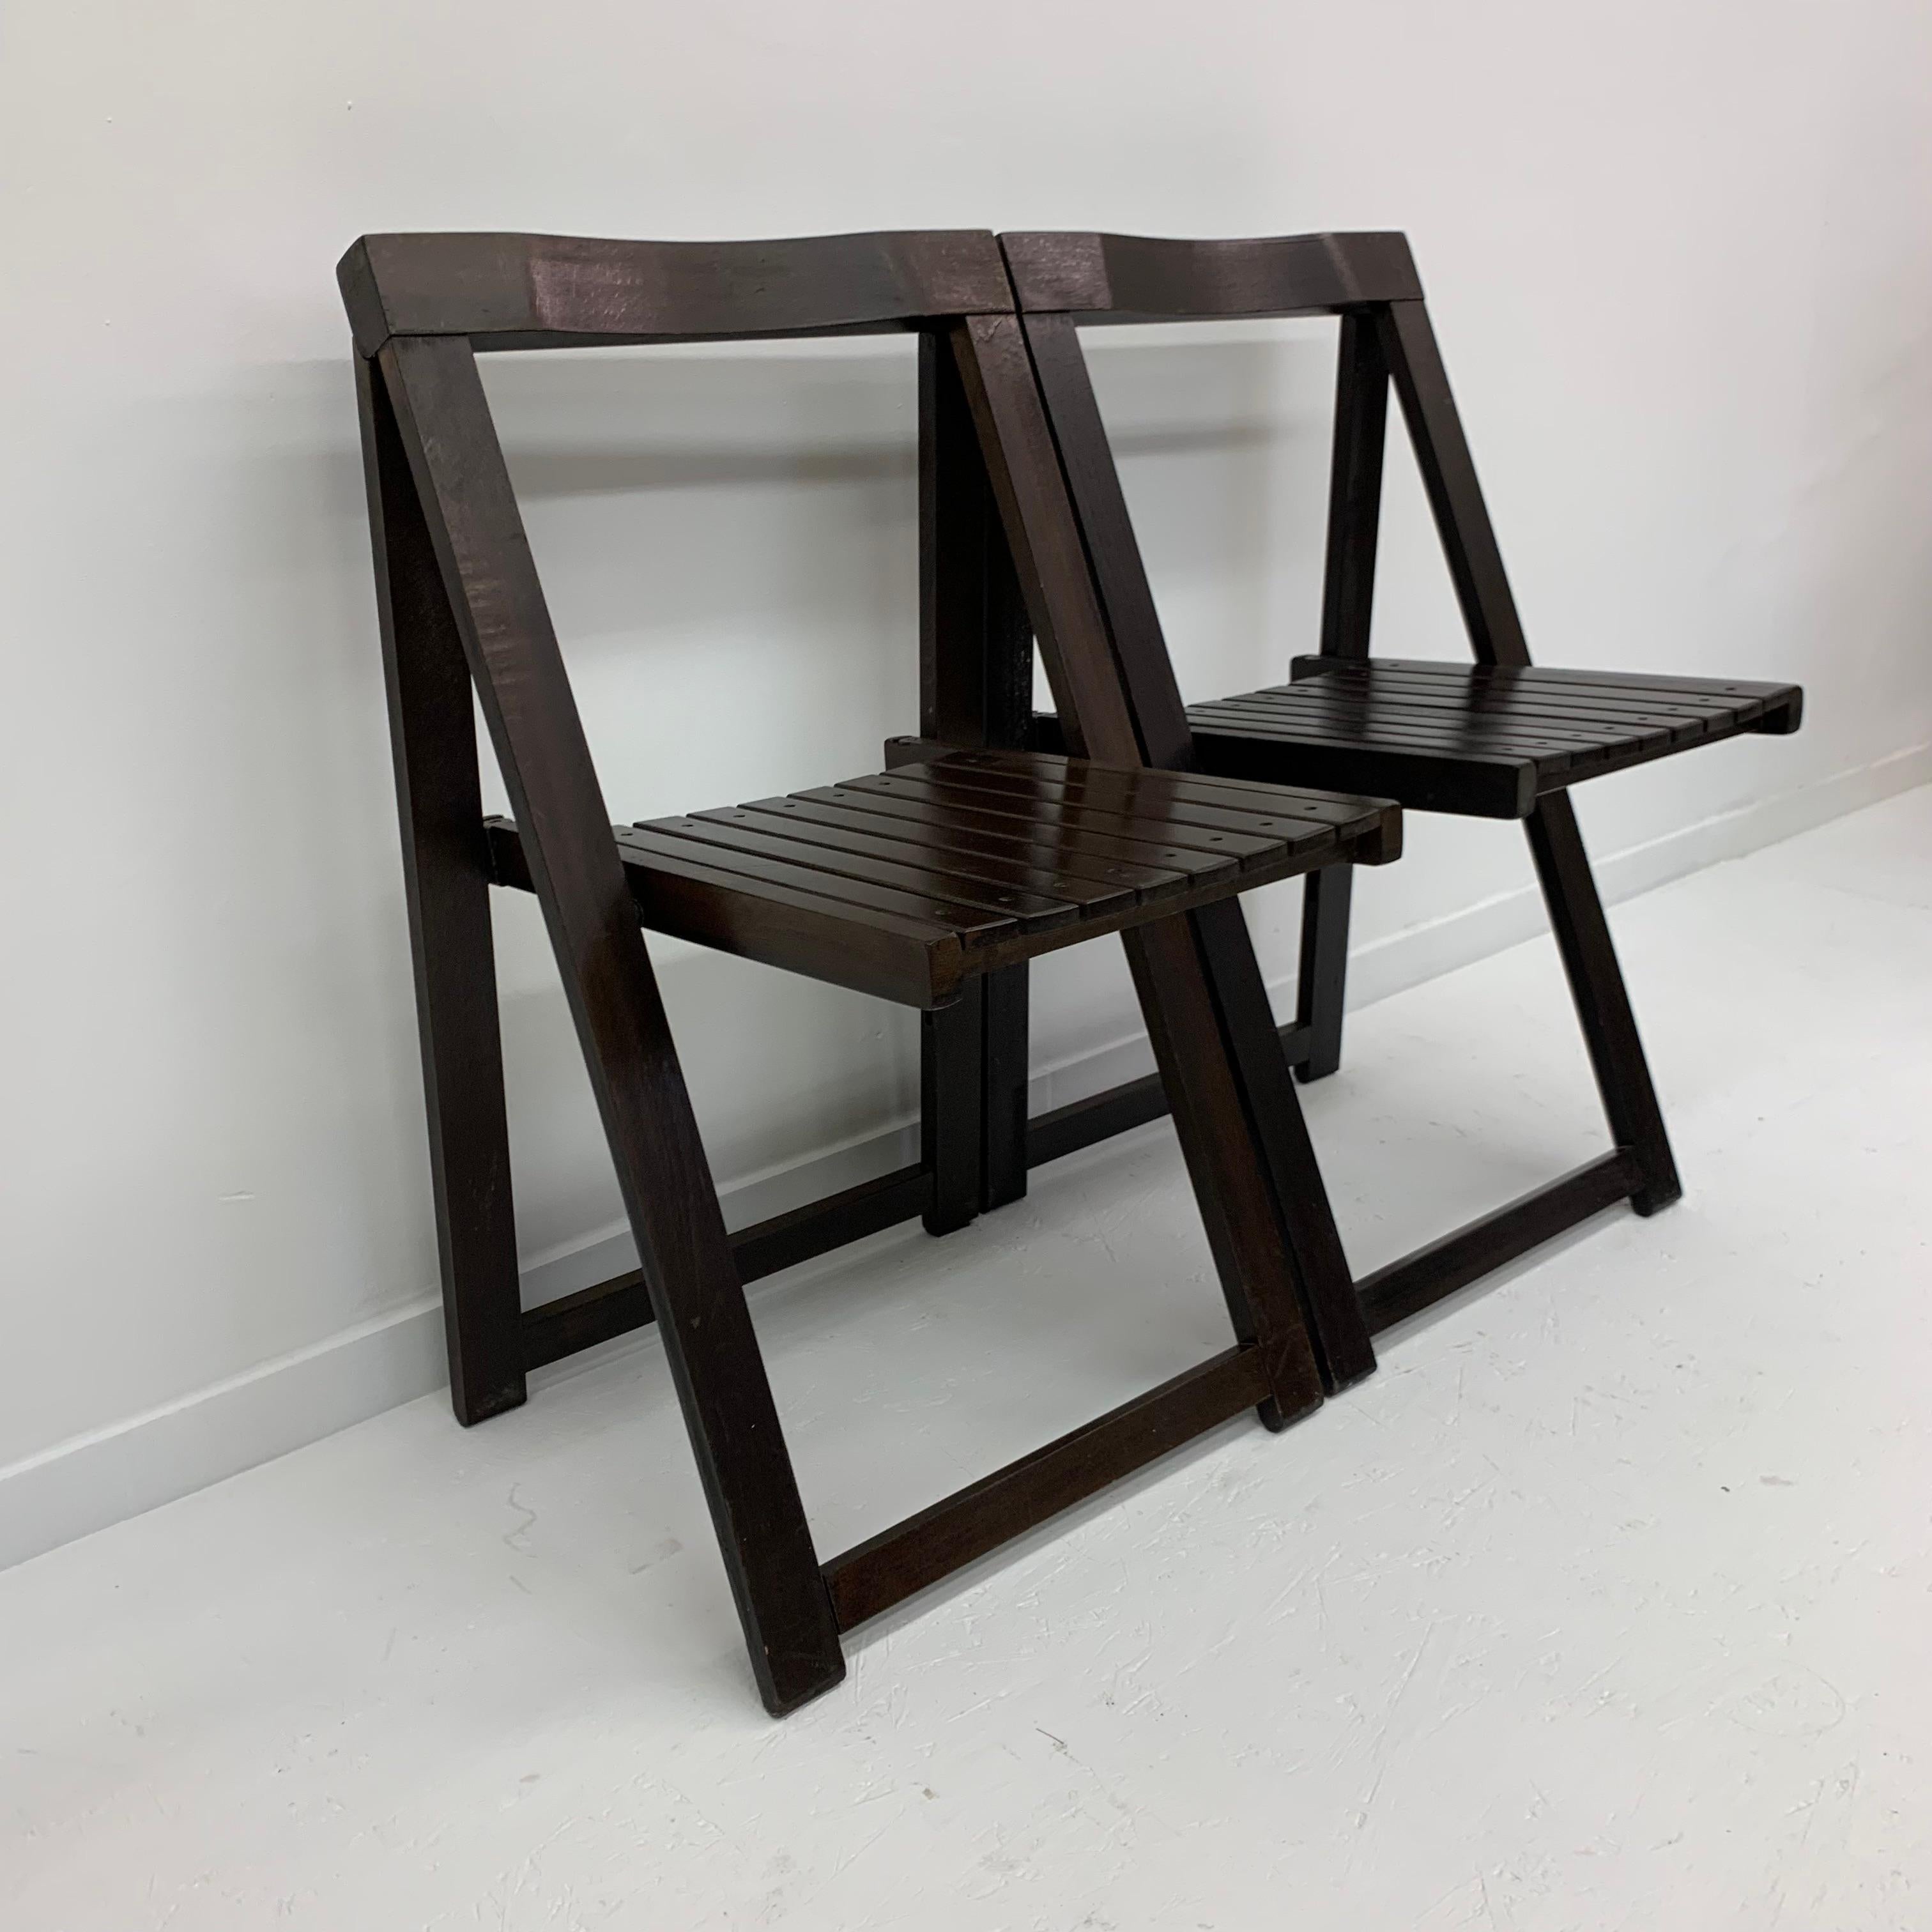 Set of 2 Aldo Jacober for Alberto Bazzani wooden folding chairs, 1960’s For Sale 2